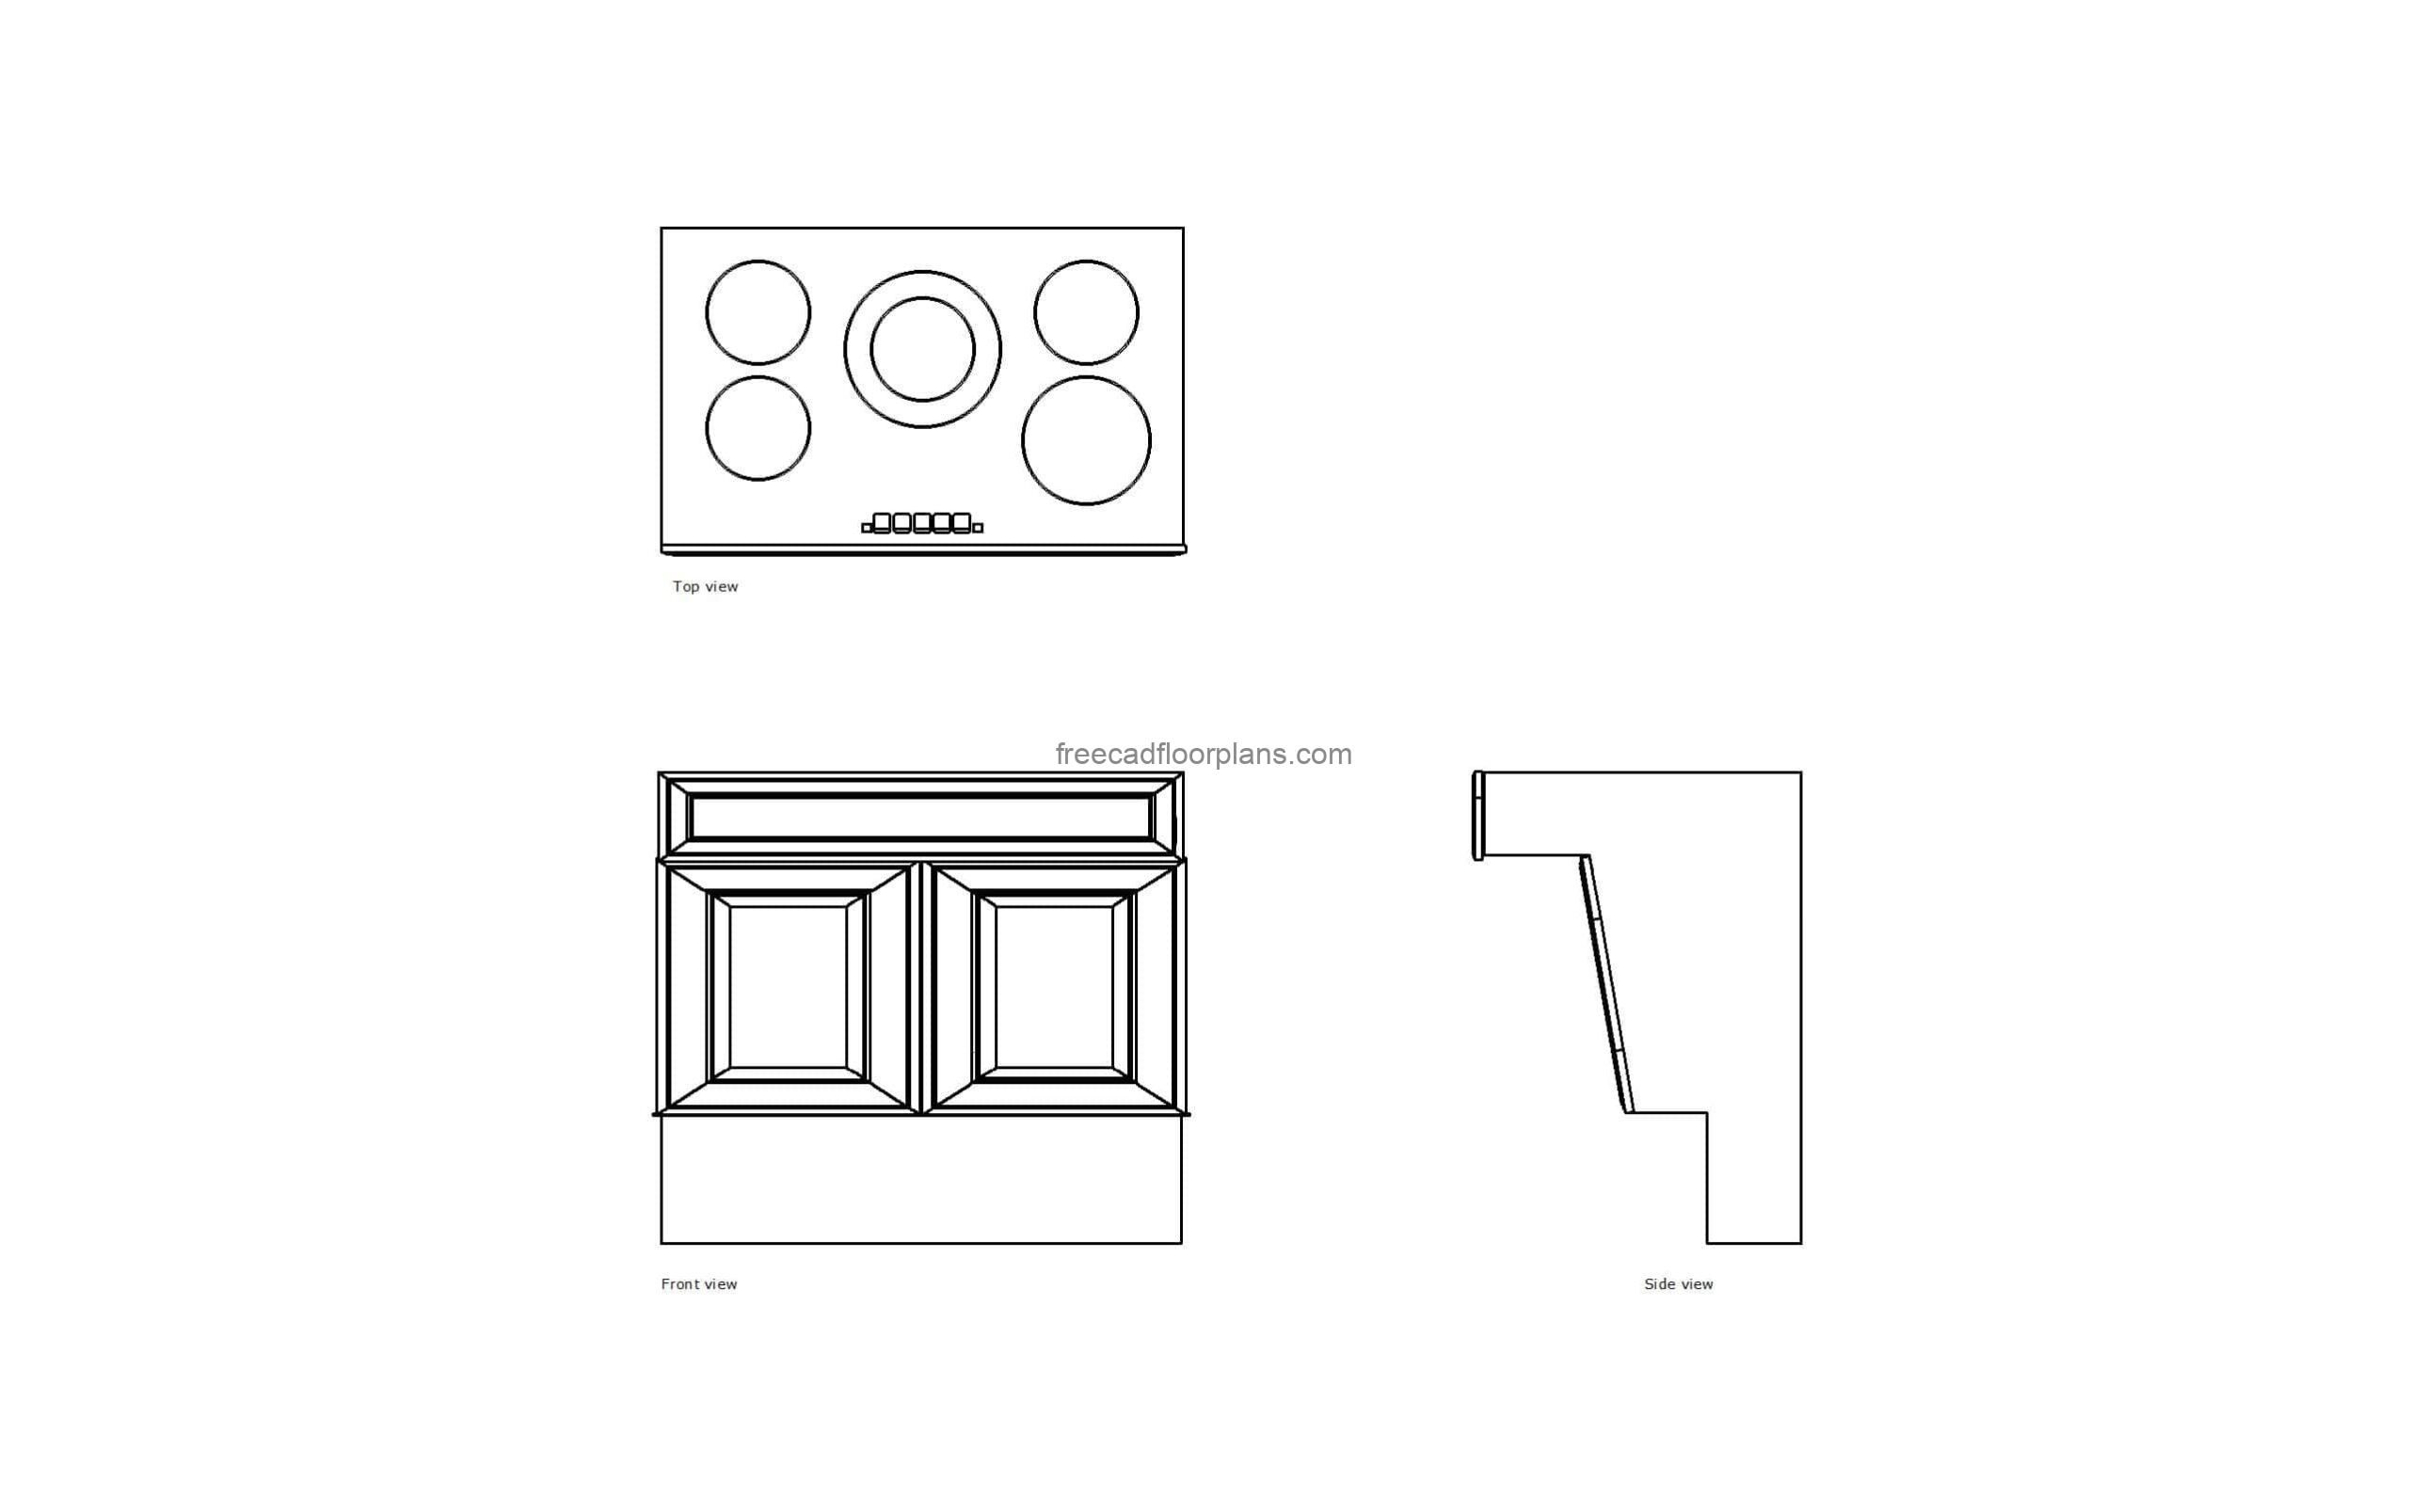 autocad drawing of an accessible stove for free download, 2d views, plan and elevation, dwg file